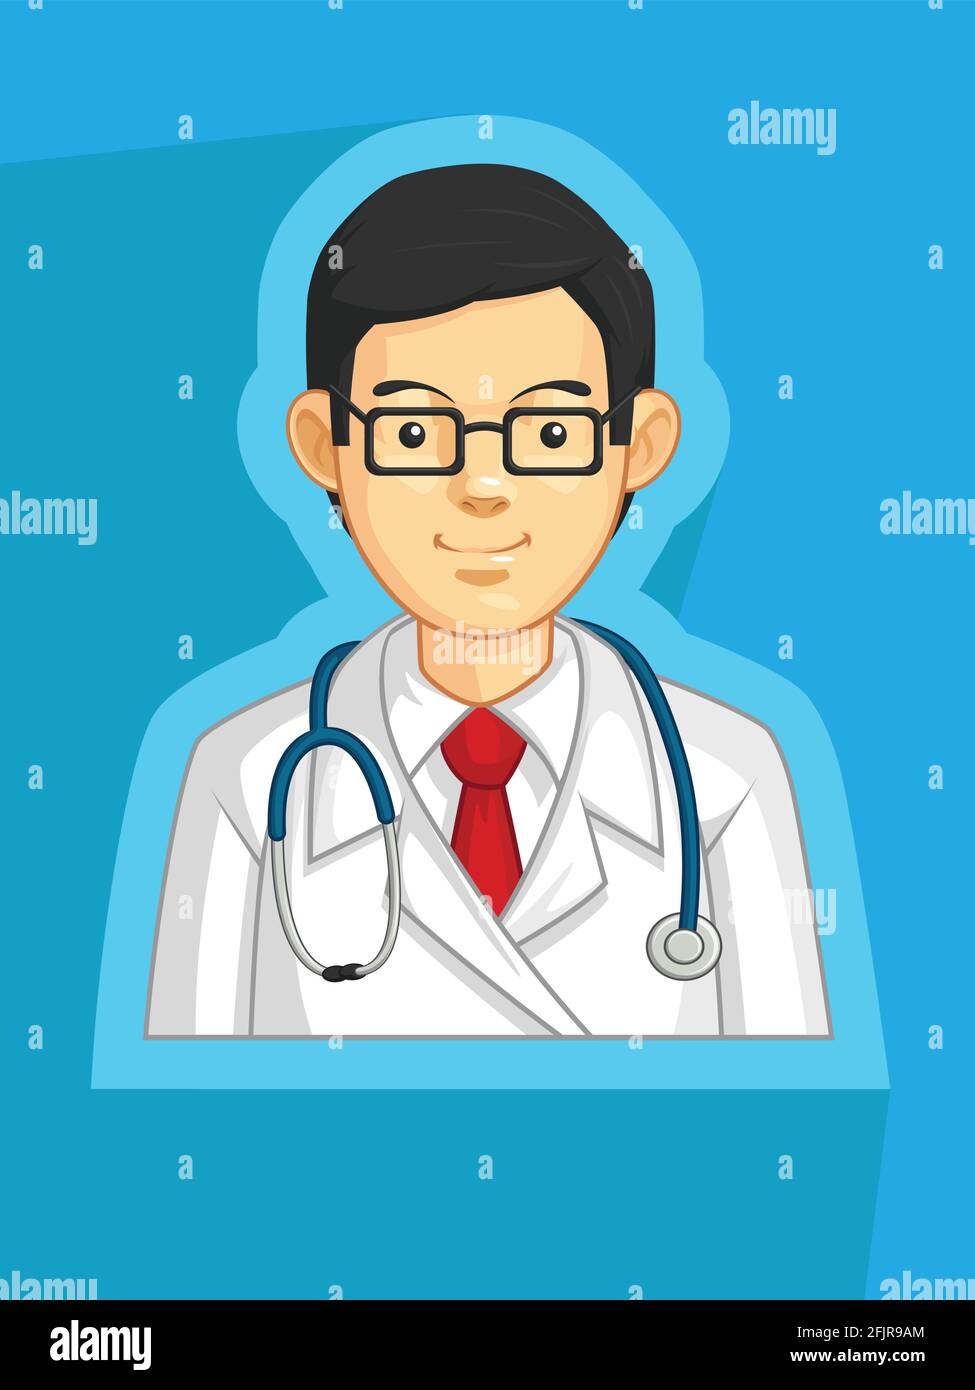 Medical Doctor General Practitioner Physician Profile Avatar Cartoon Stock Vector